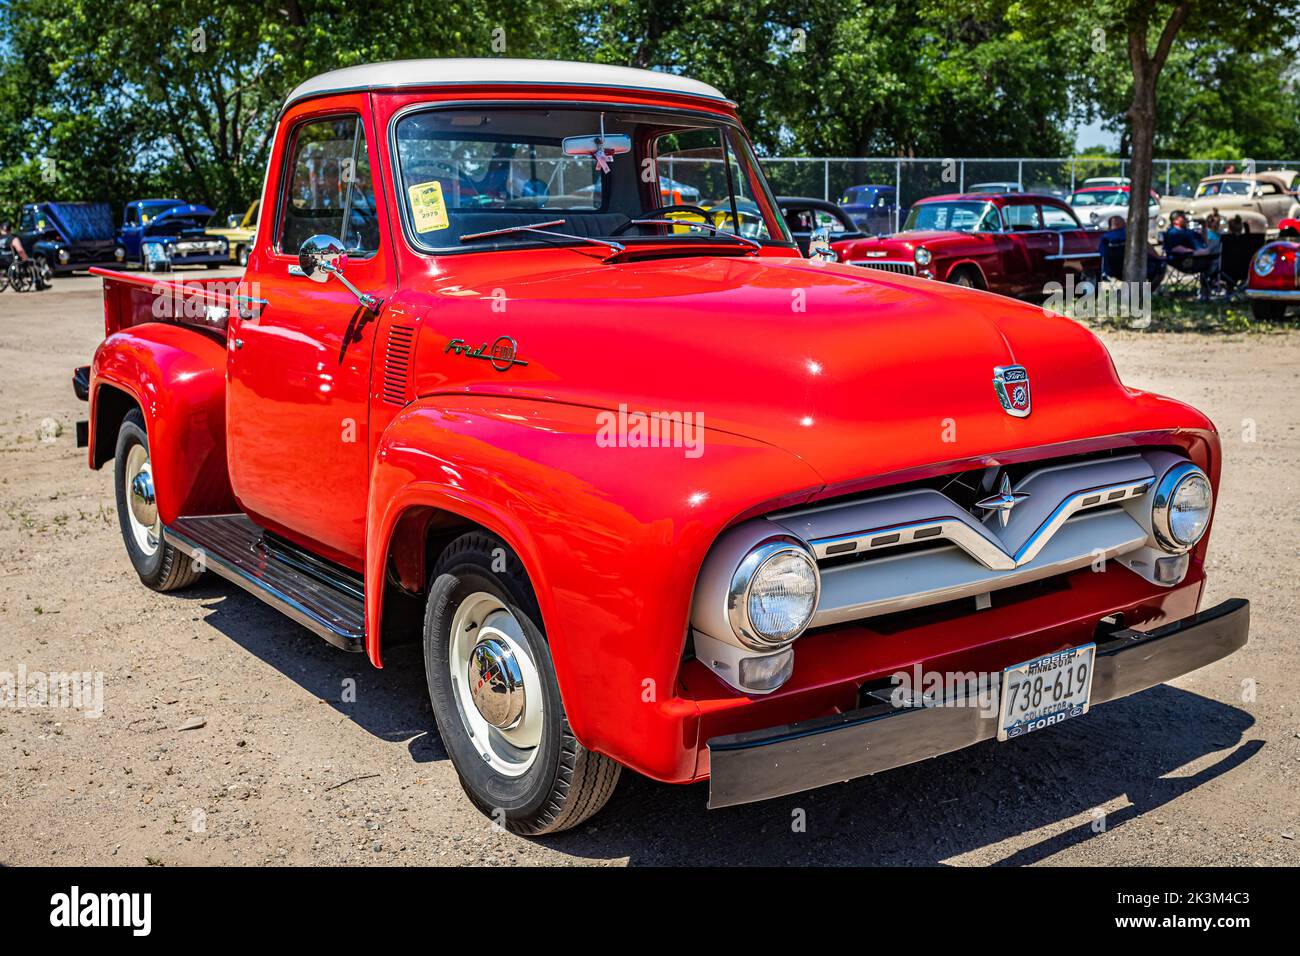 Falcon Heights, MN - June 18, 2022: High perspective front corner view of a 1955 Ford F100 Pickup Truck at a local car show. Stock Photo